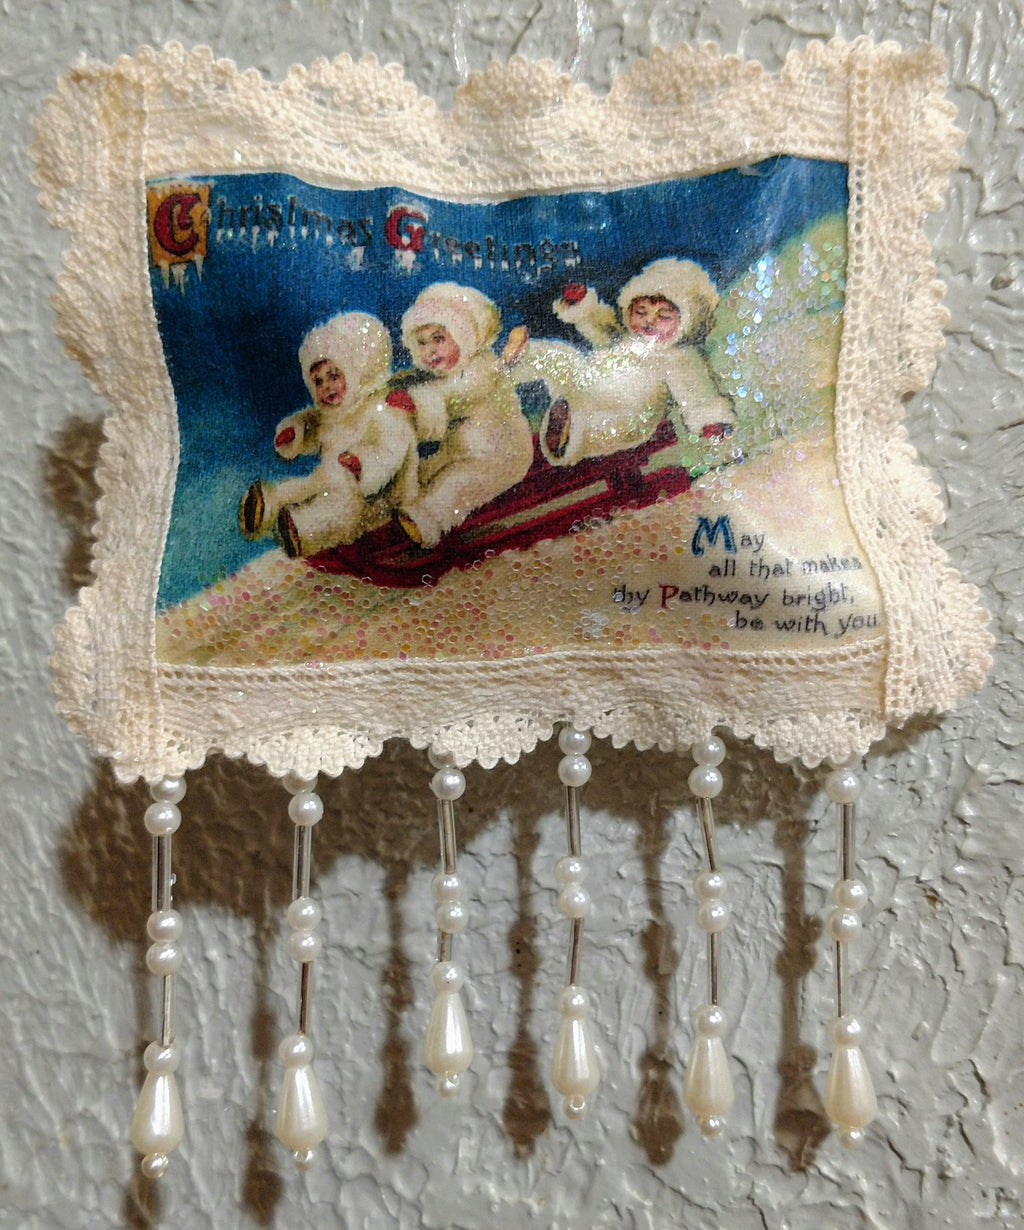 Snow Babies Greeting Scented Sachet Ornament - One of a Kind!